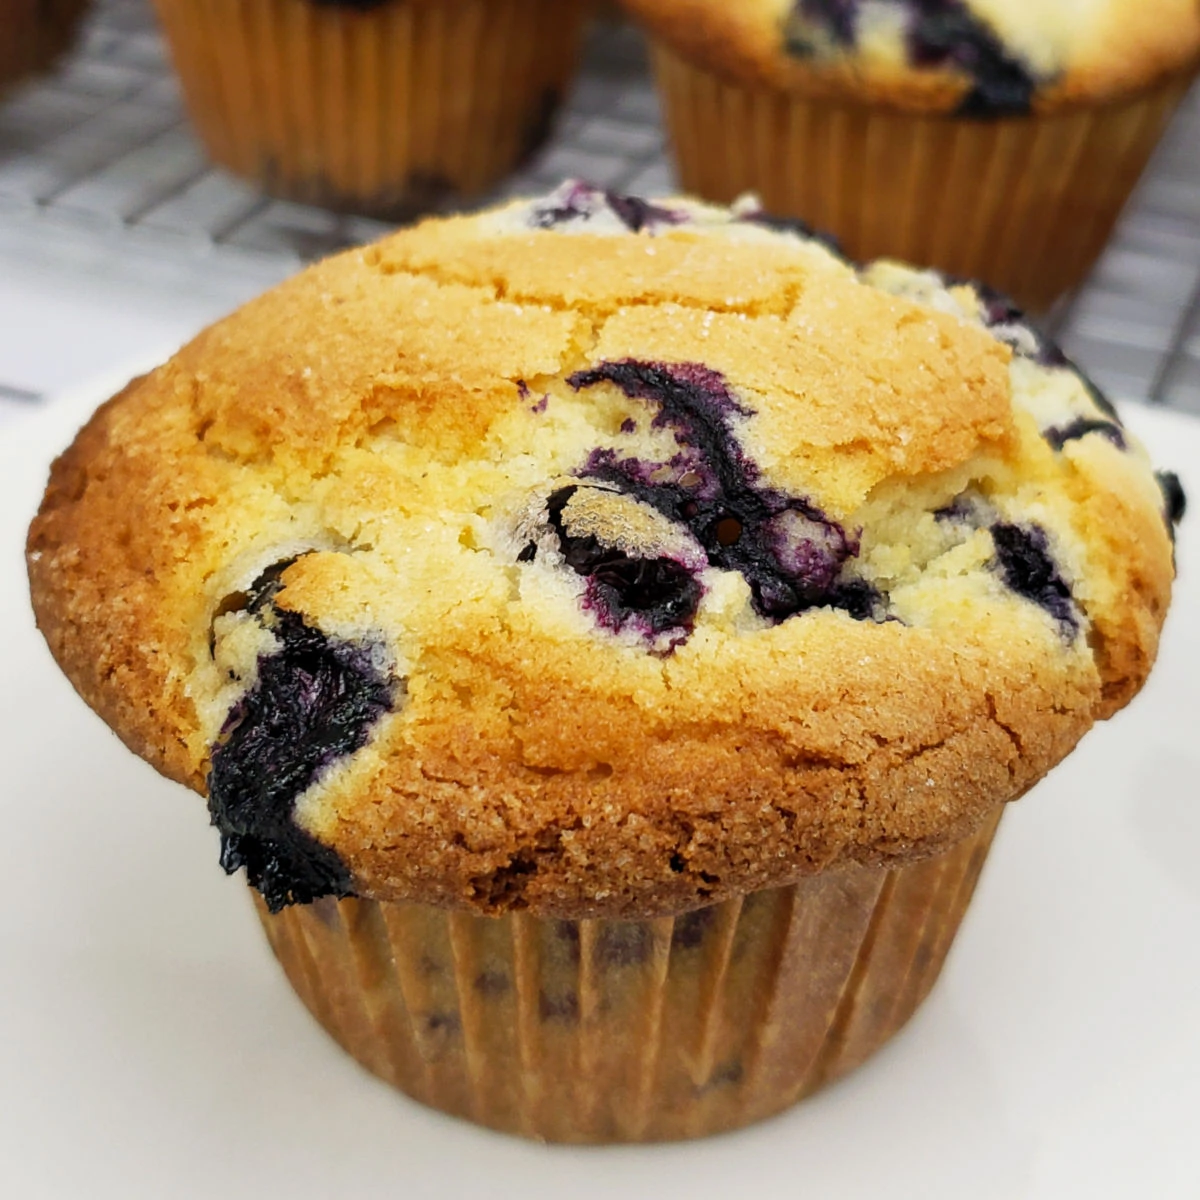 Gluten free blueberry muffin with golden brown top.